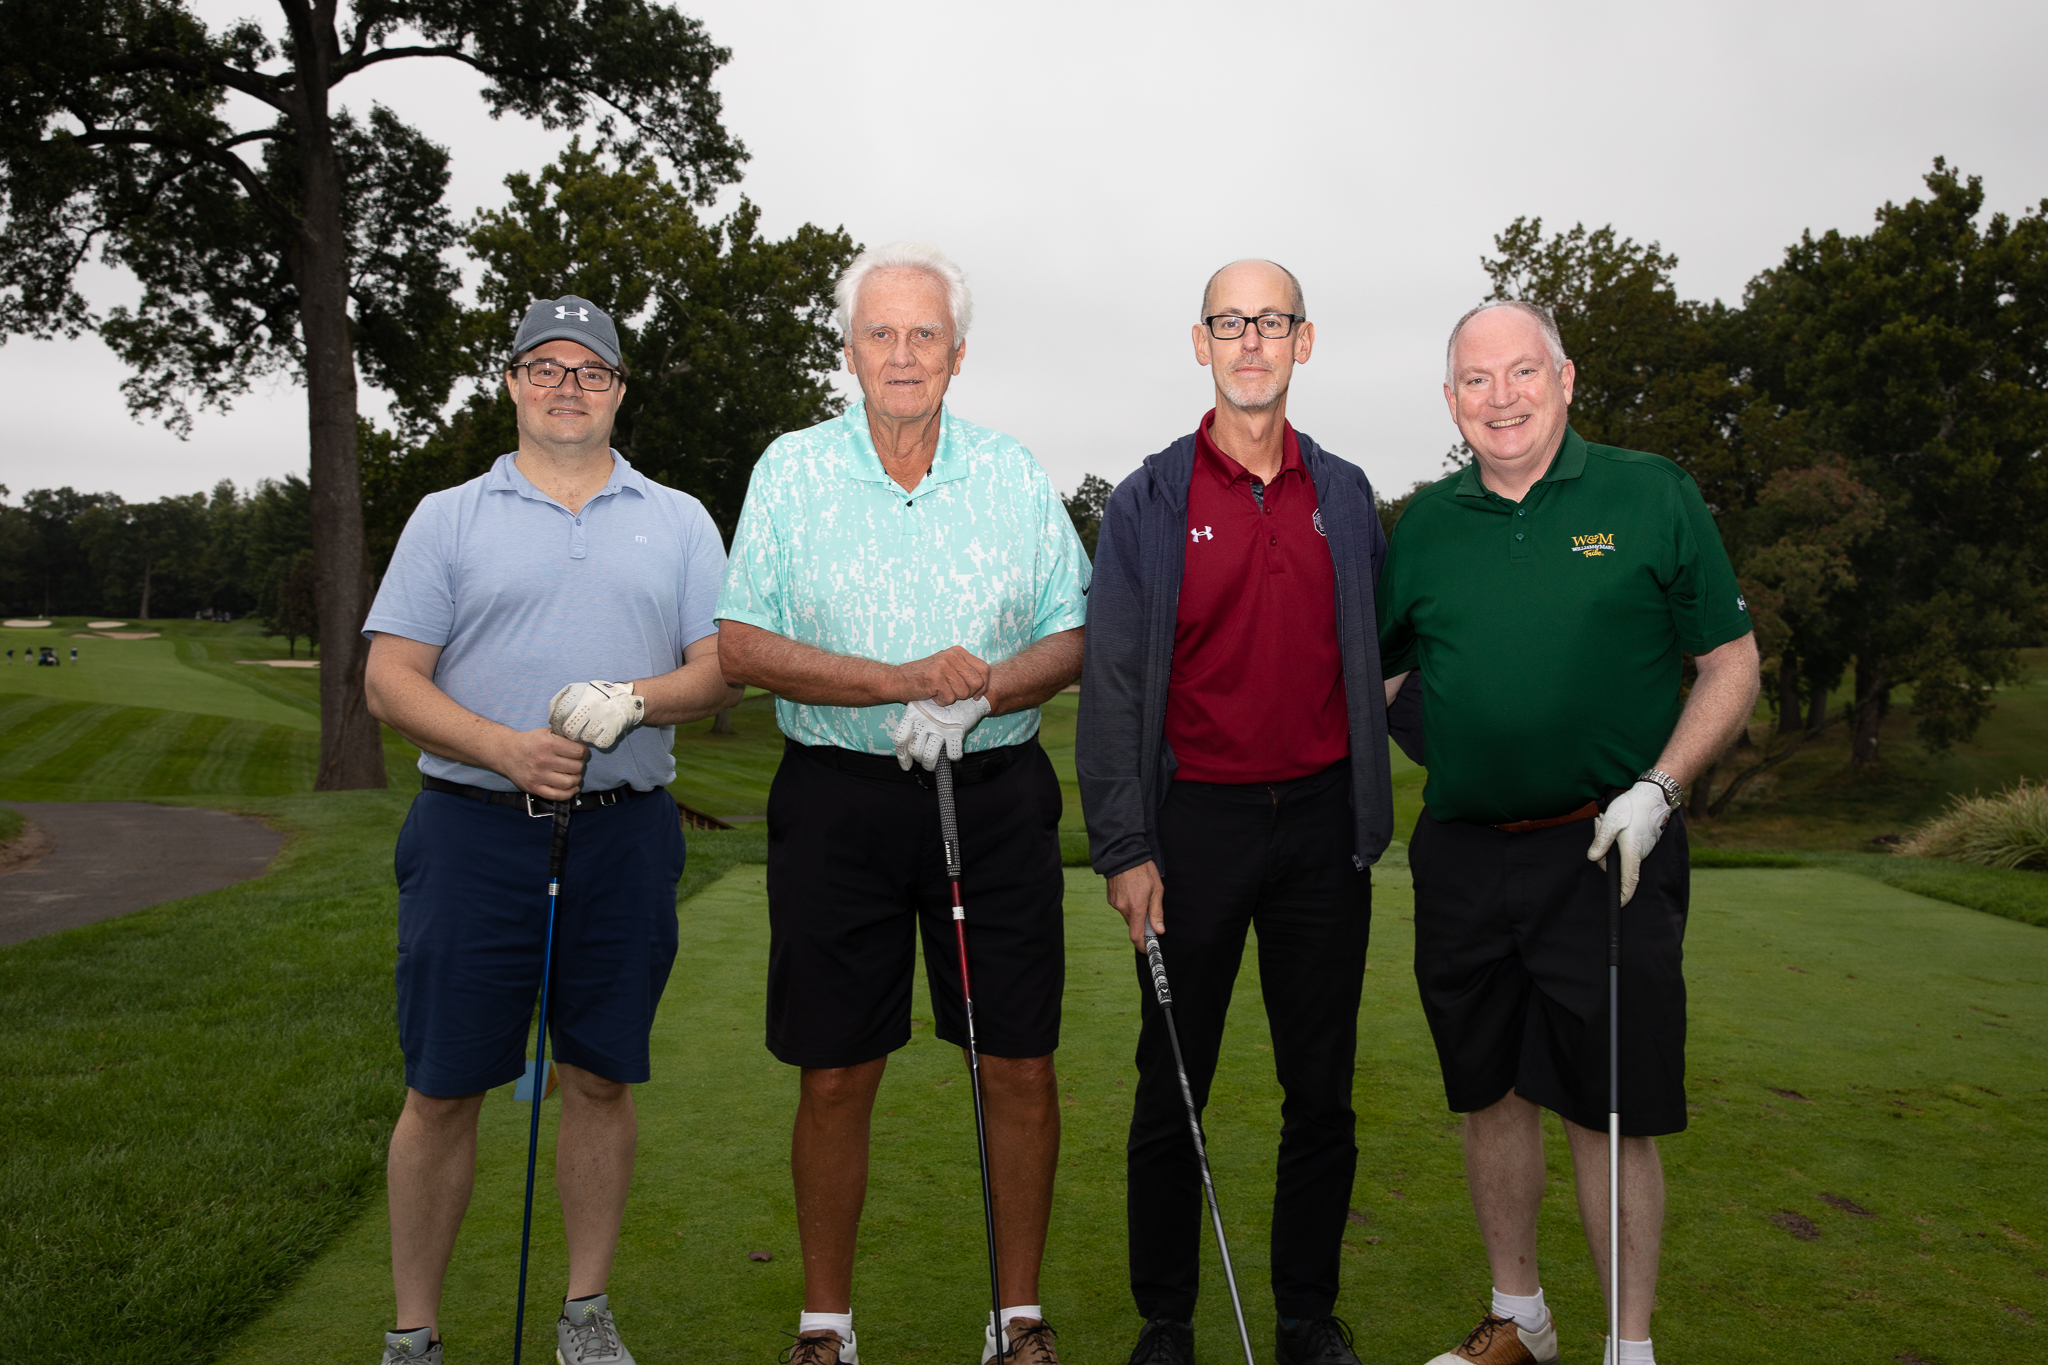 Bill and Pete pose with other golfers on the green during a charity golf tournament